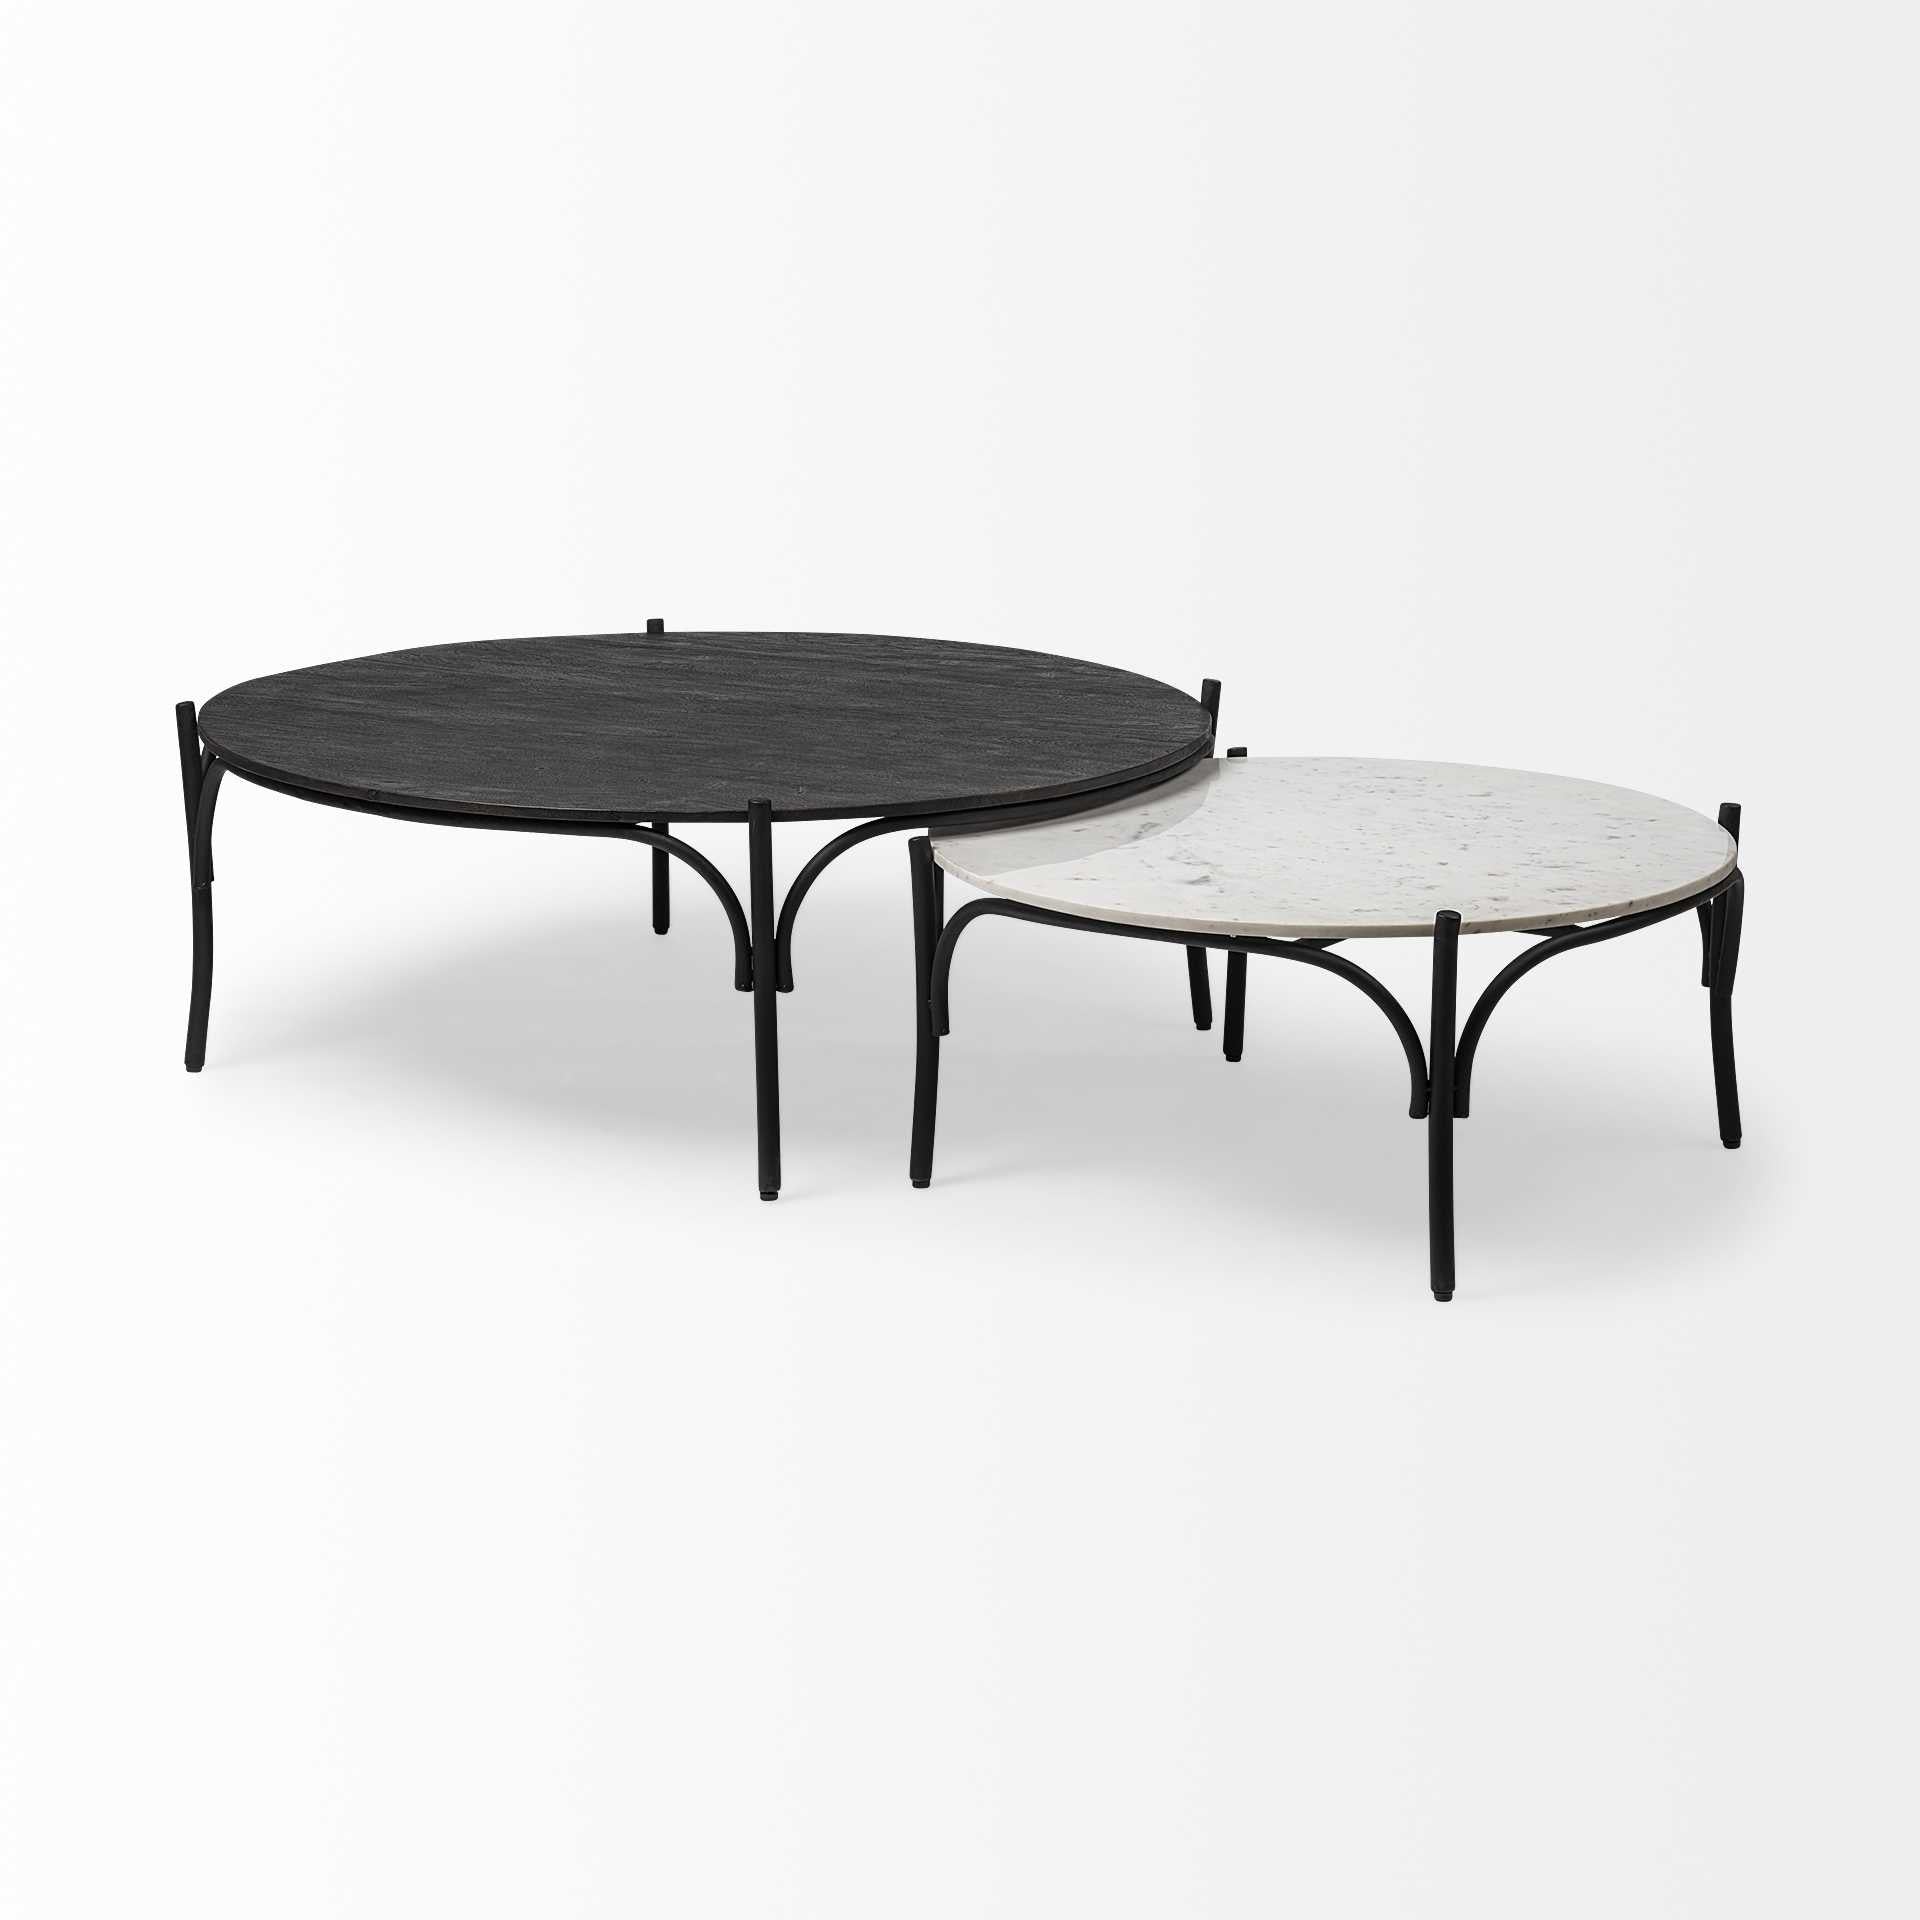 36" Round White Marble Top Black And Metal Base Coffee Table